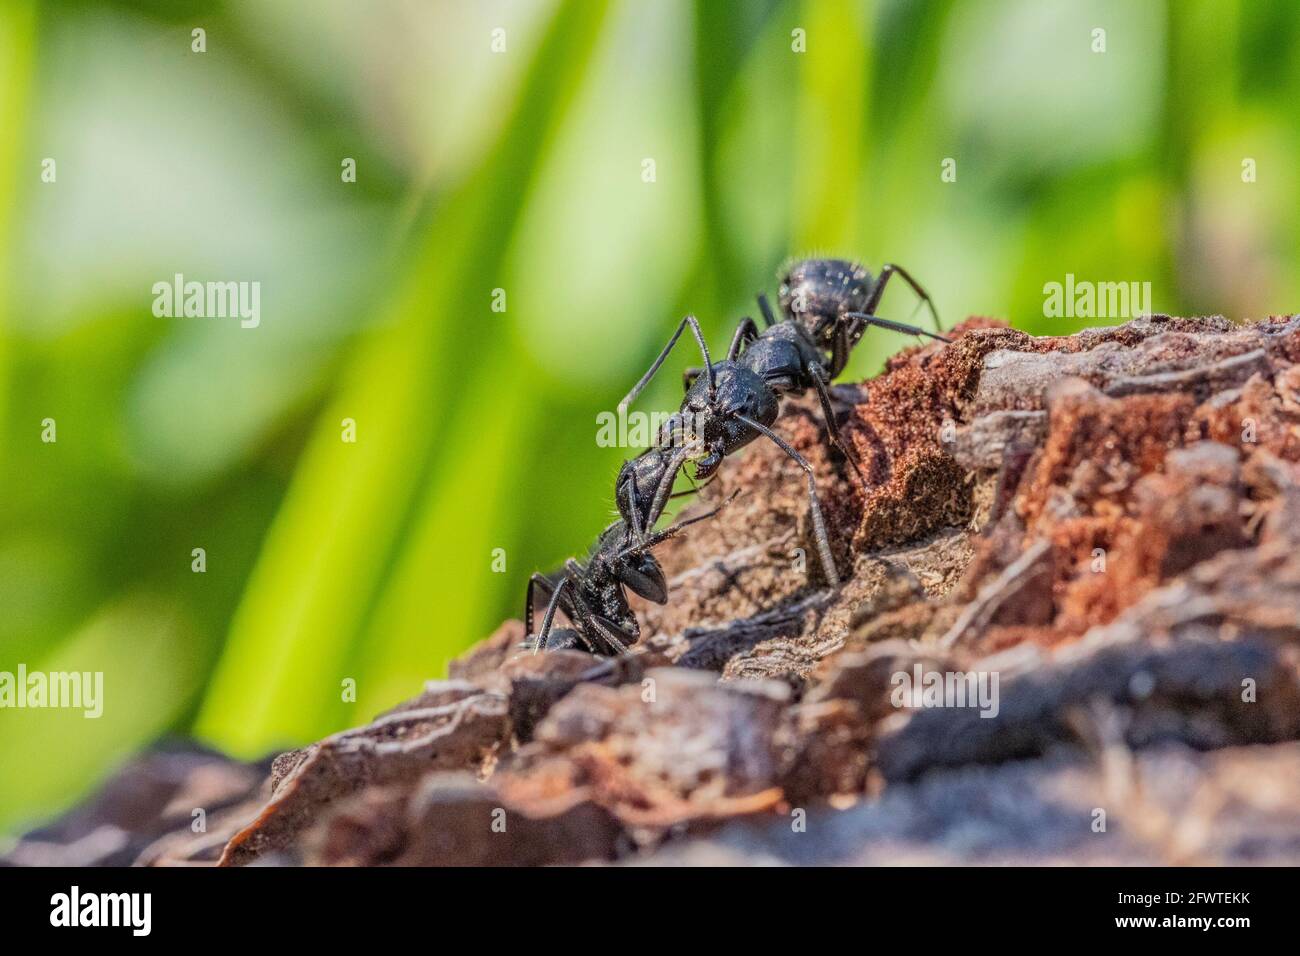 Black ants in the foreground on a tree bark Stock Photo